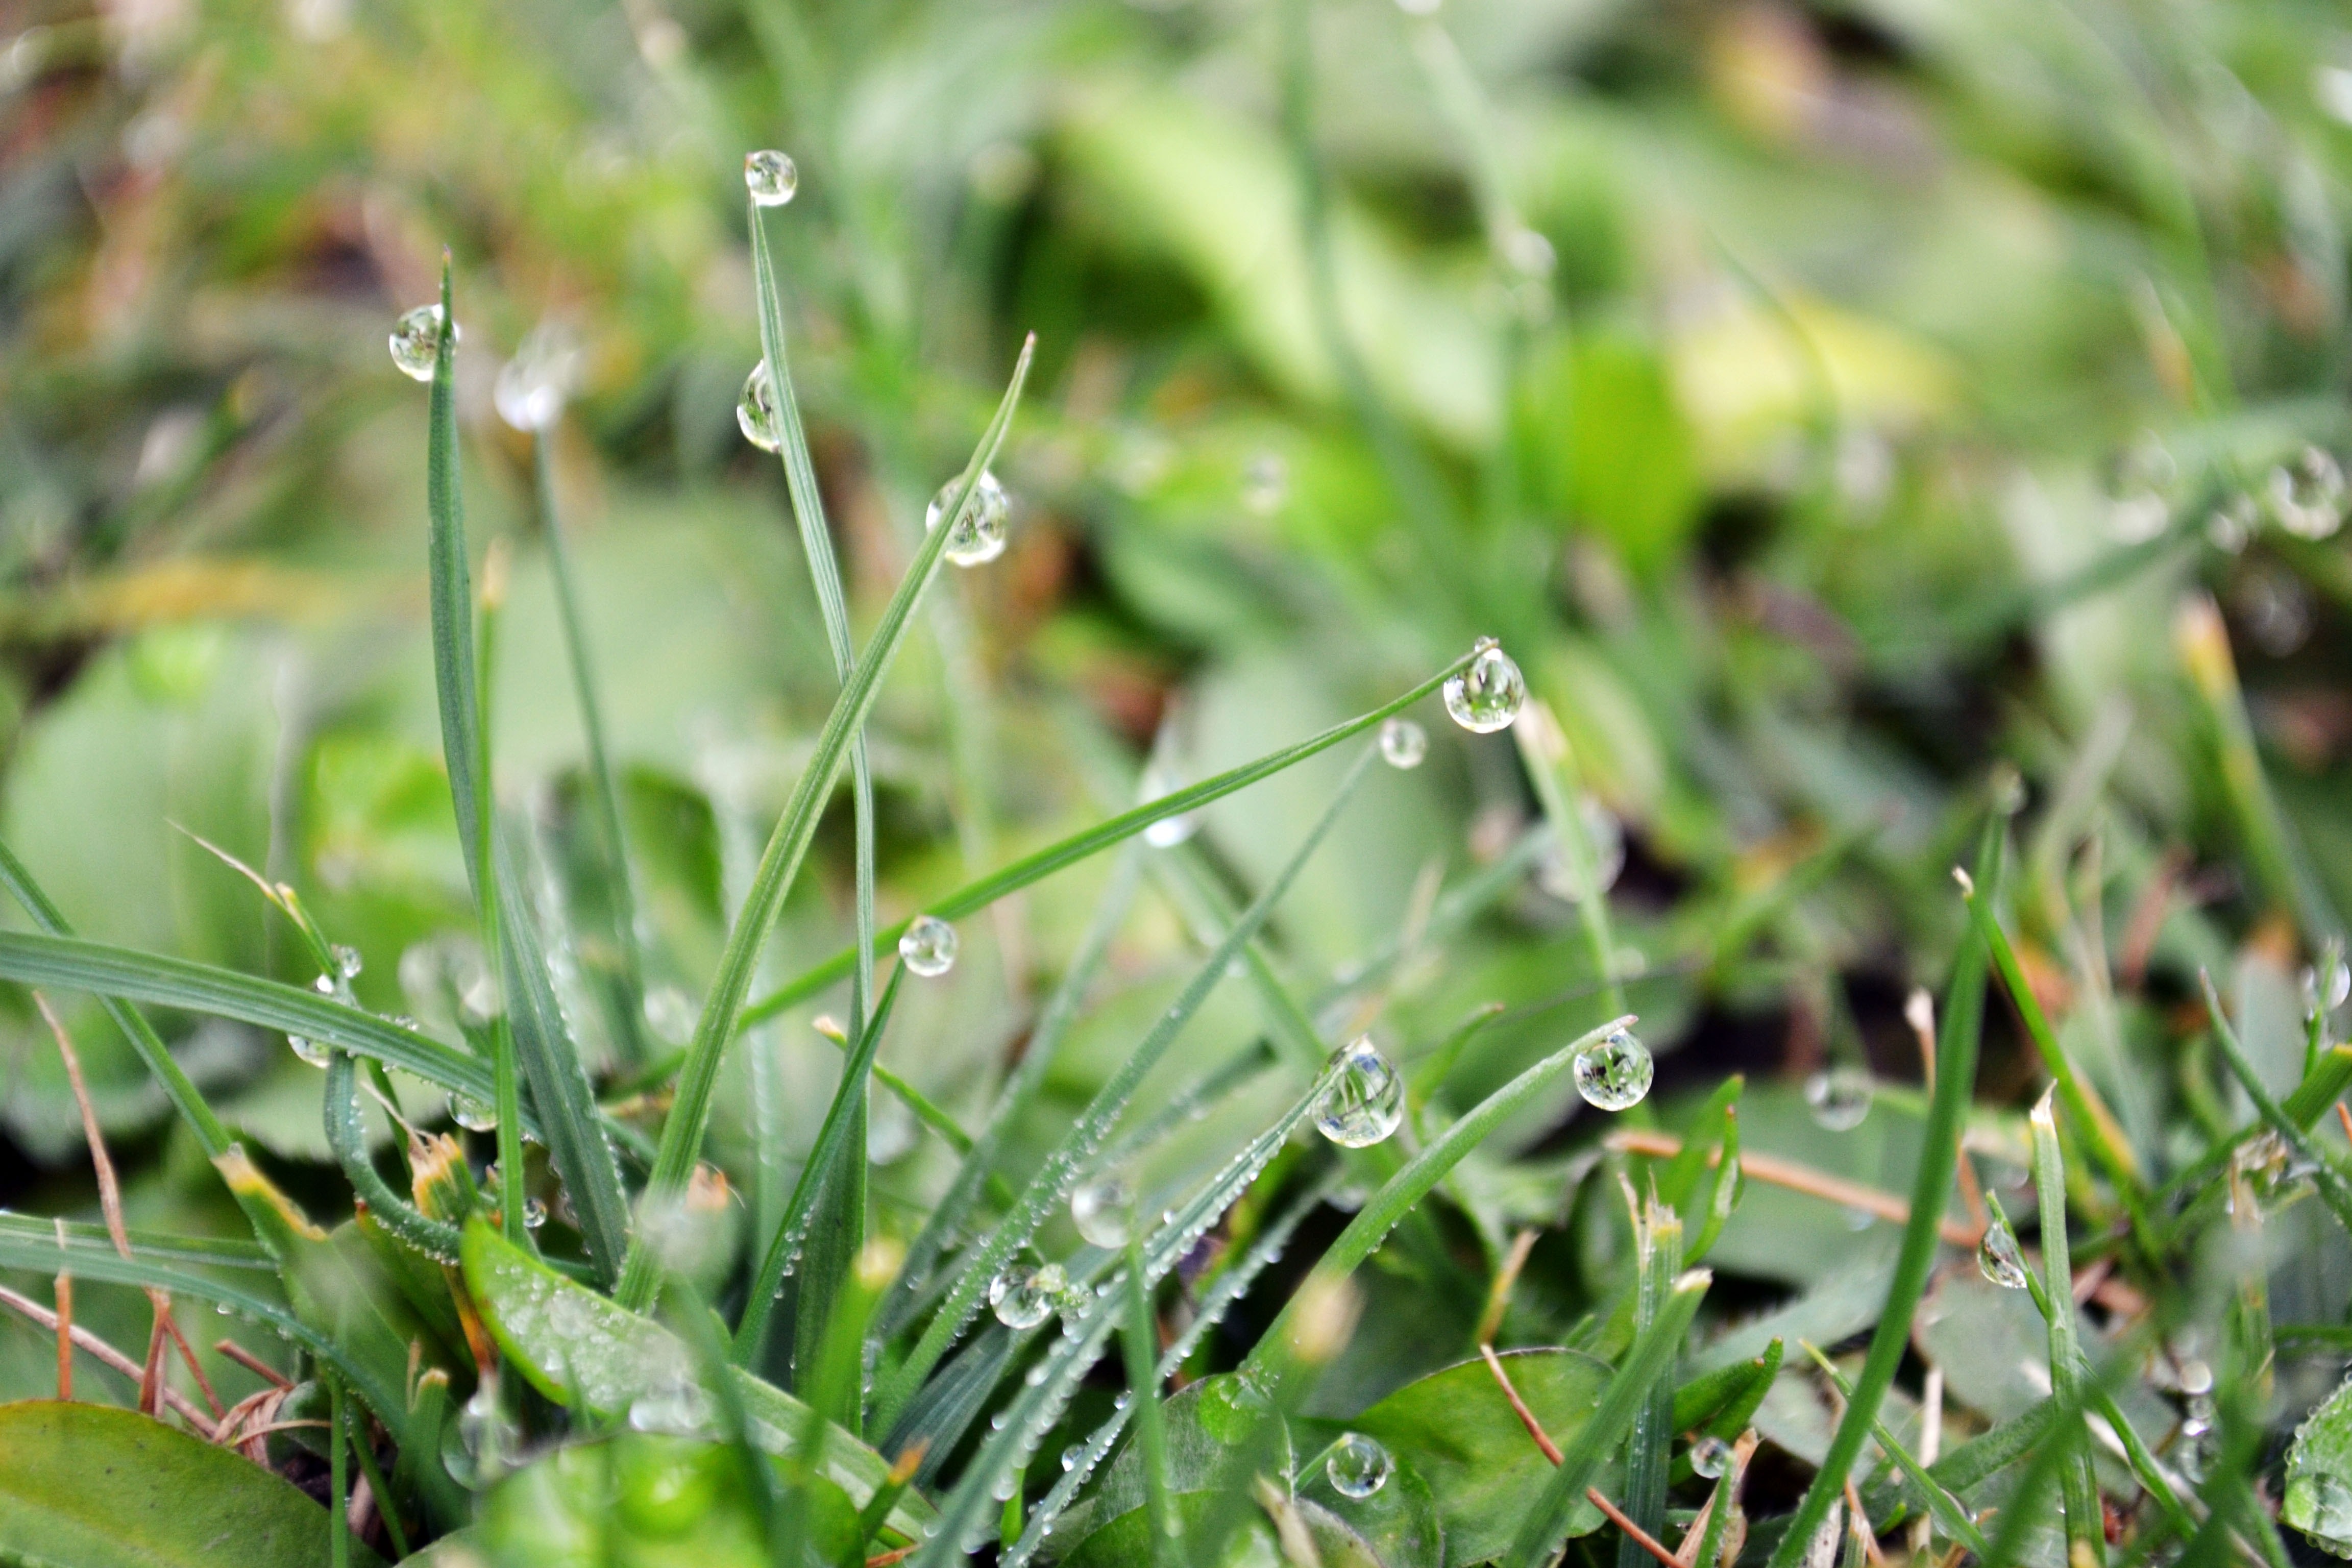 green grasses with water droplets in shallow focus lens